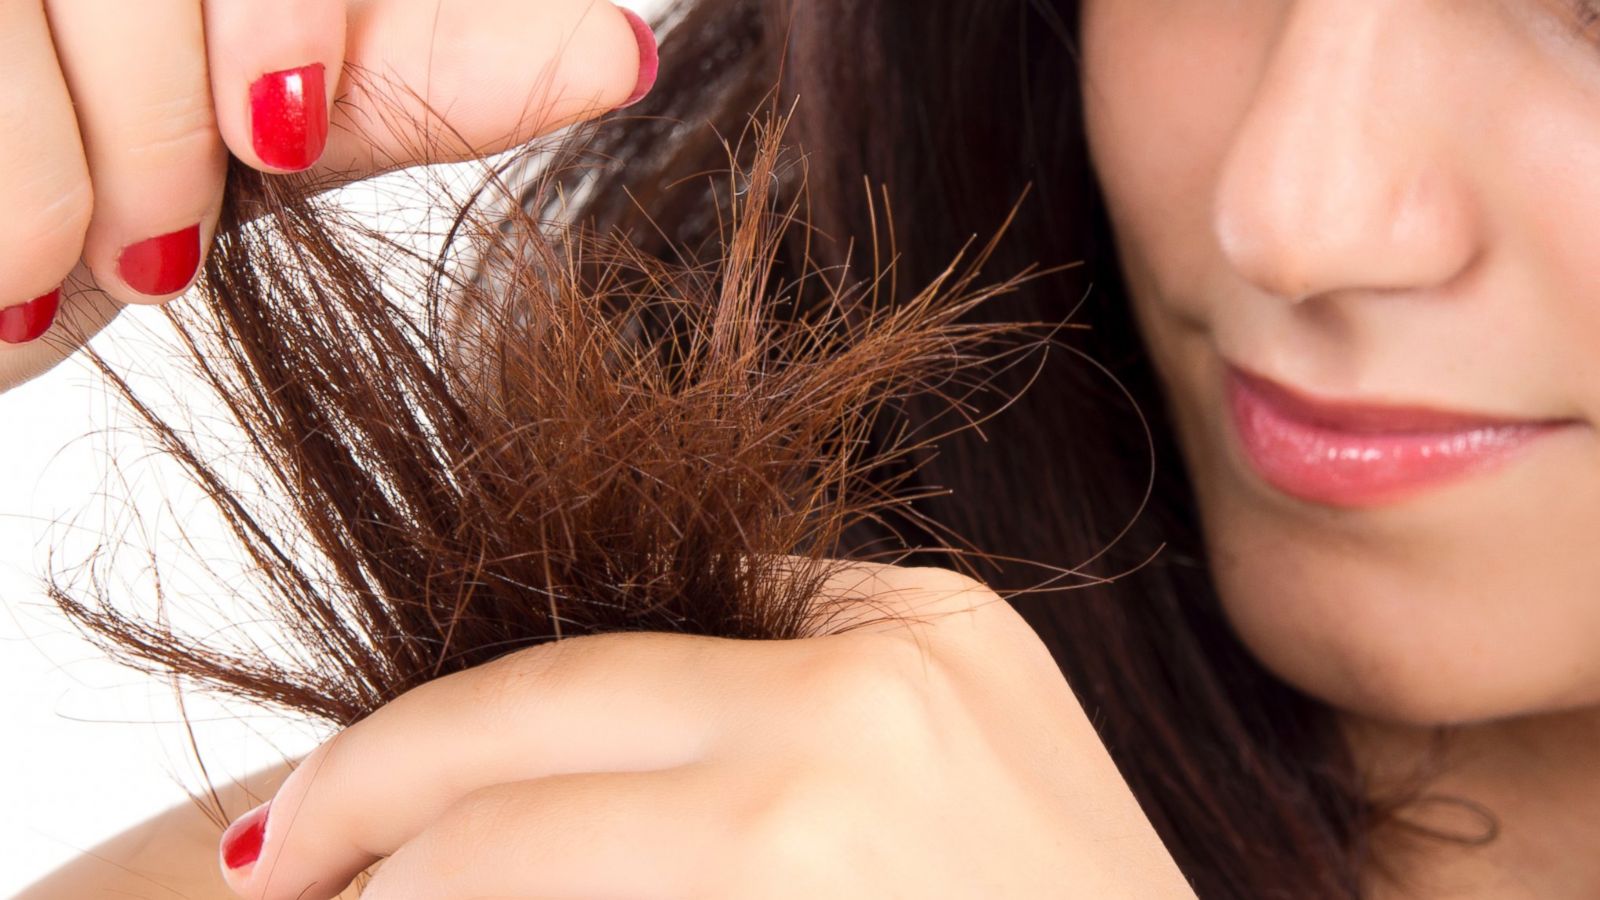 Why Hair Stylists Are Burning Your Split Ends Instead of Giving a Trim -  ABC News